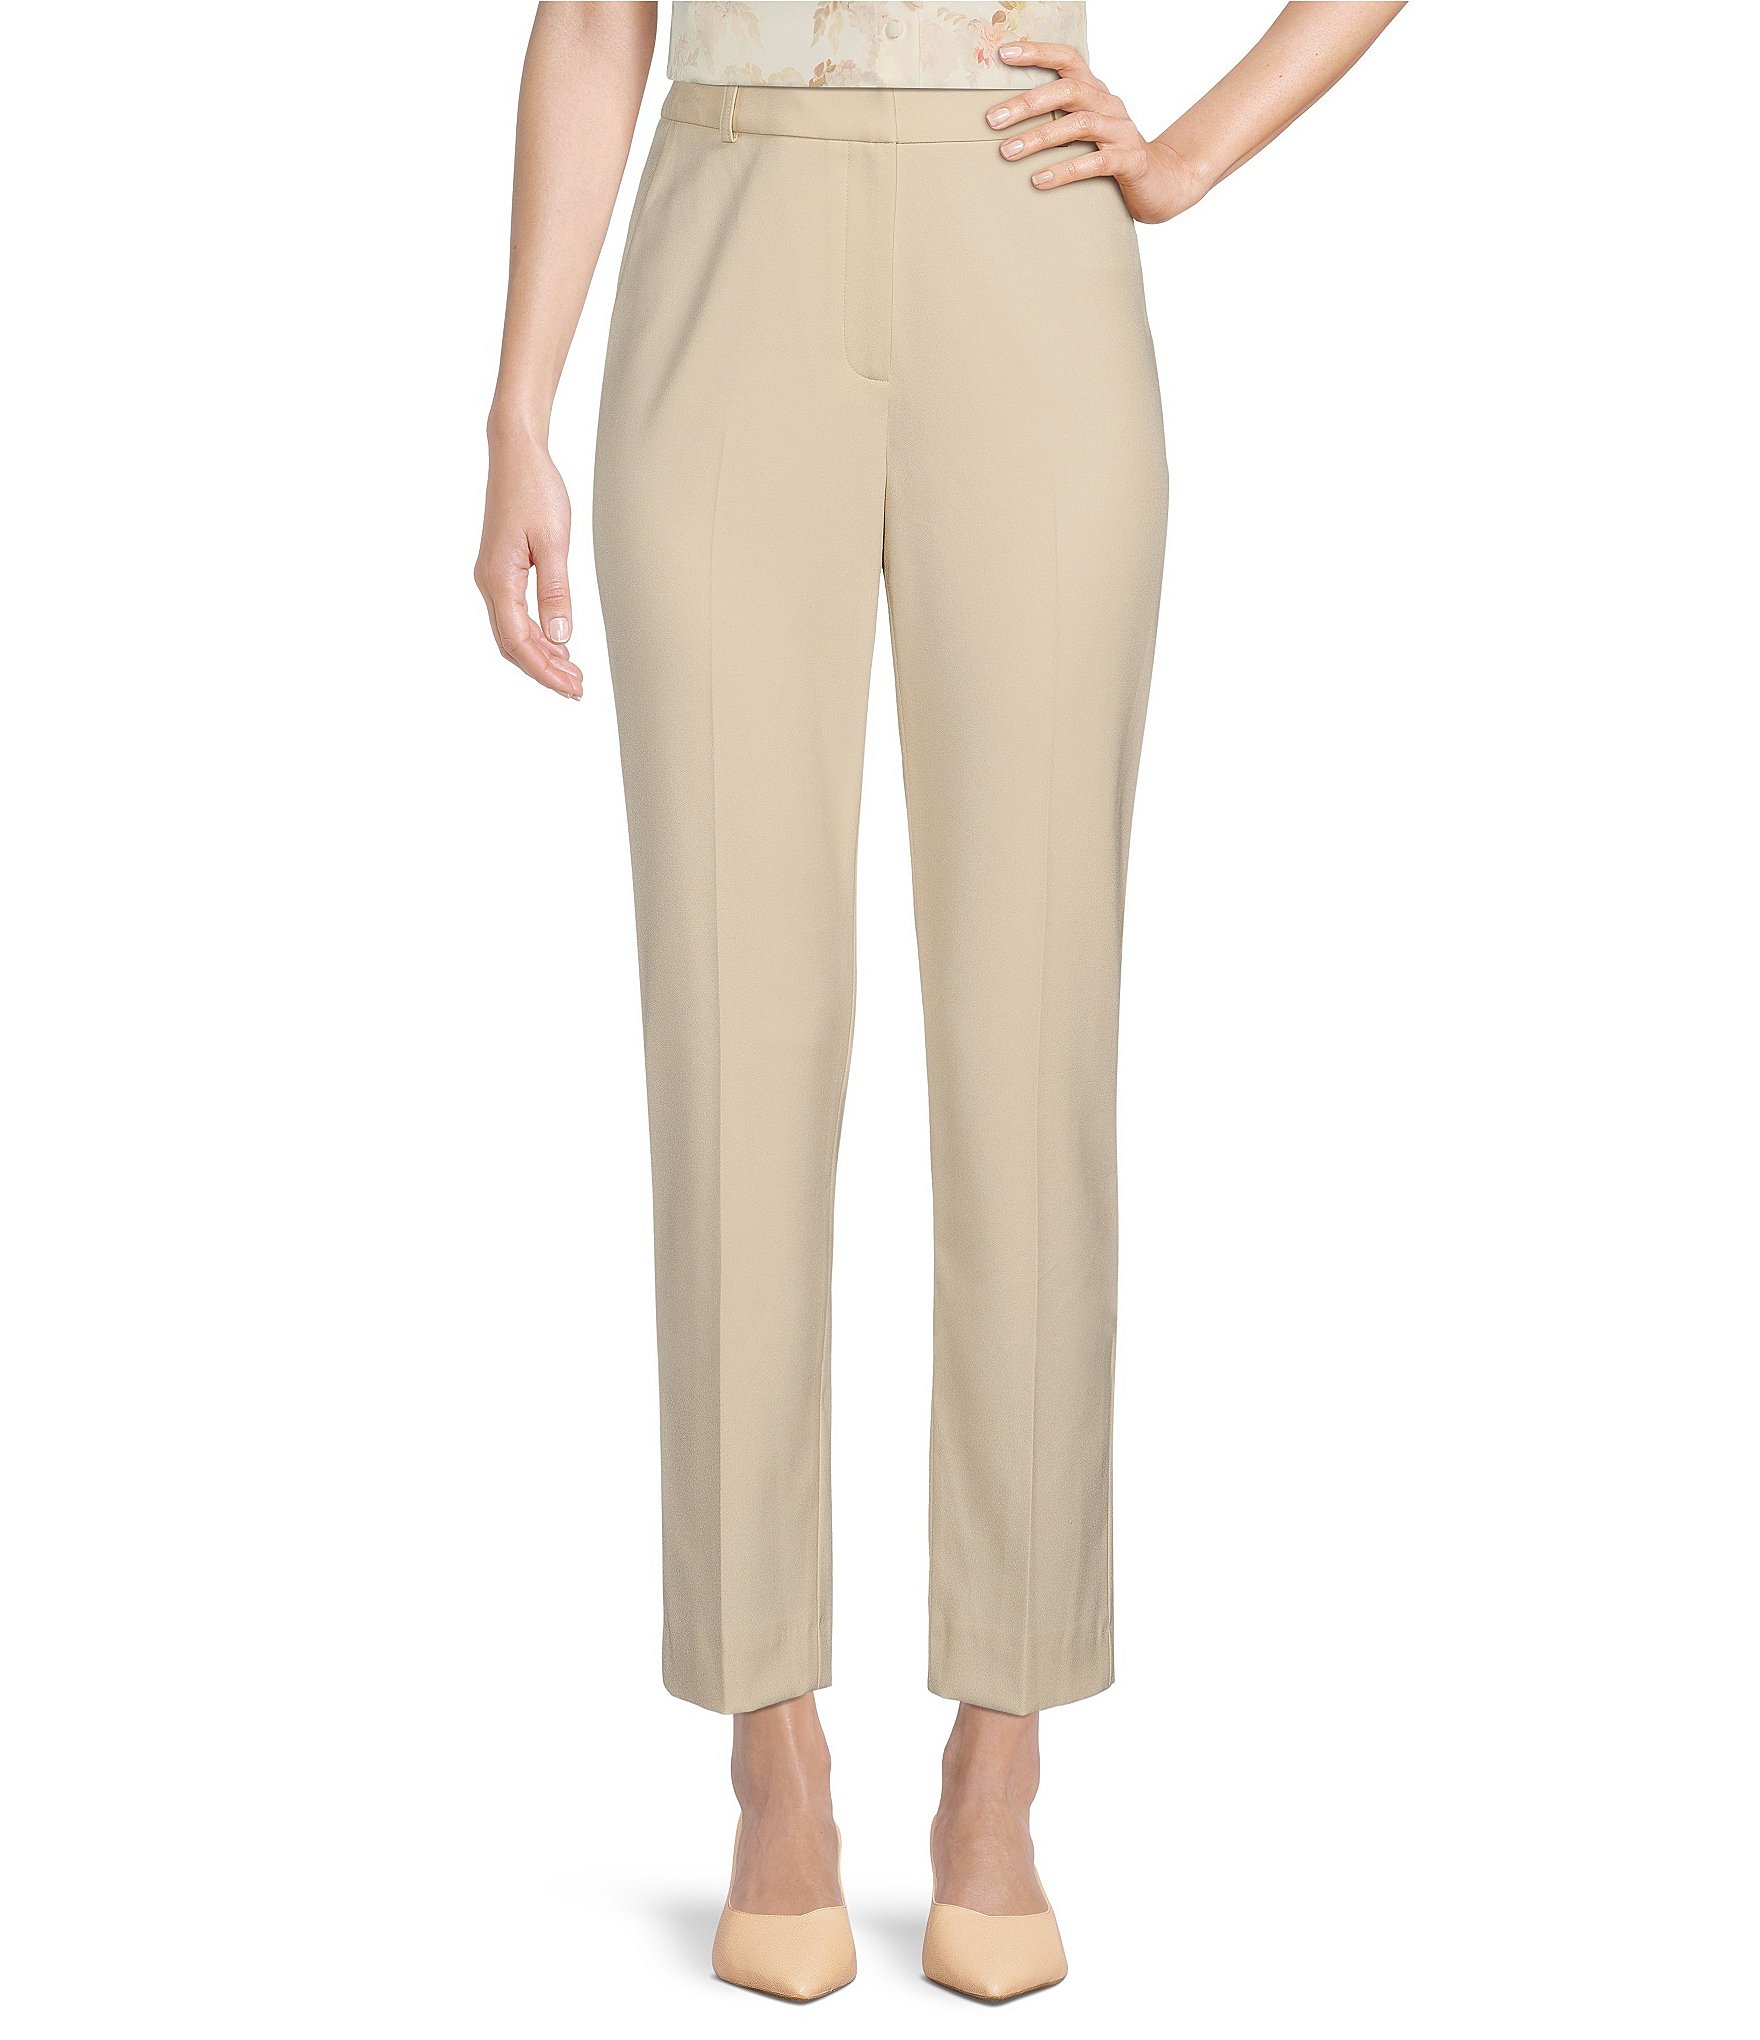 high waisted pants: Women's Workwear, Suits & Office Attire